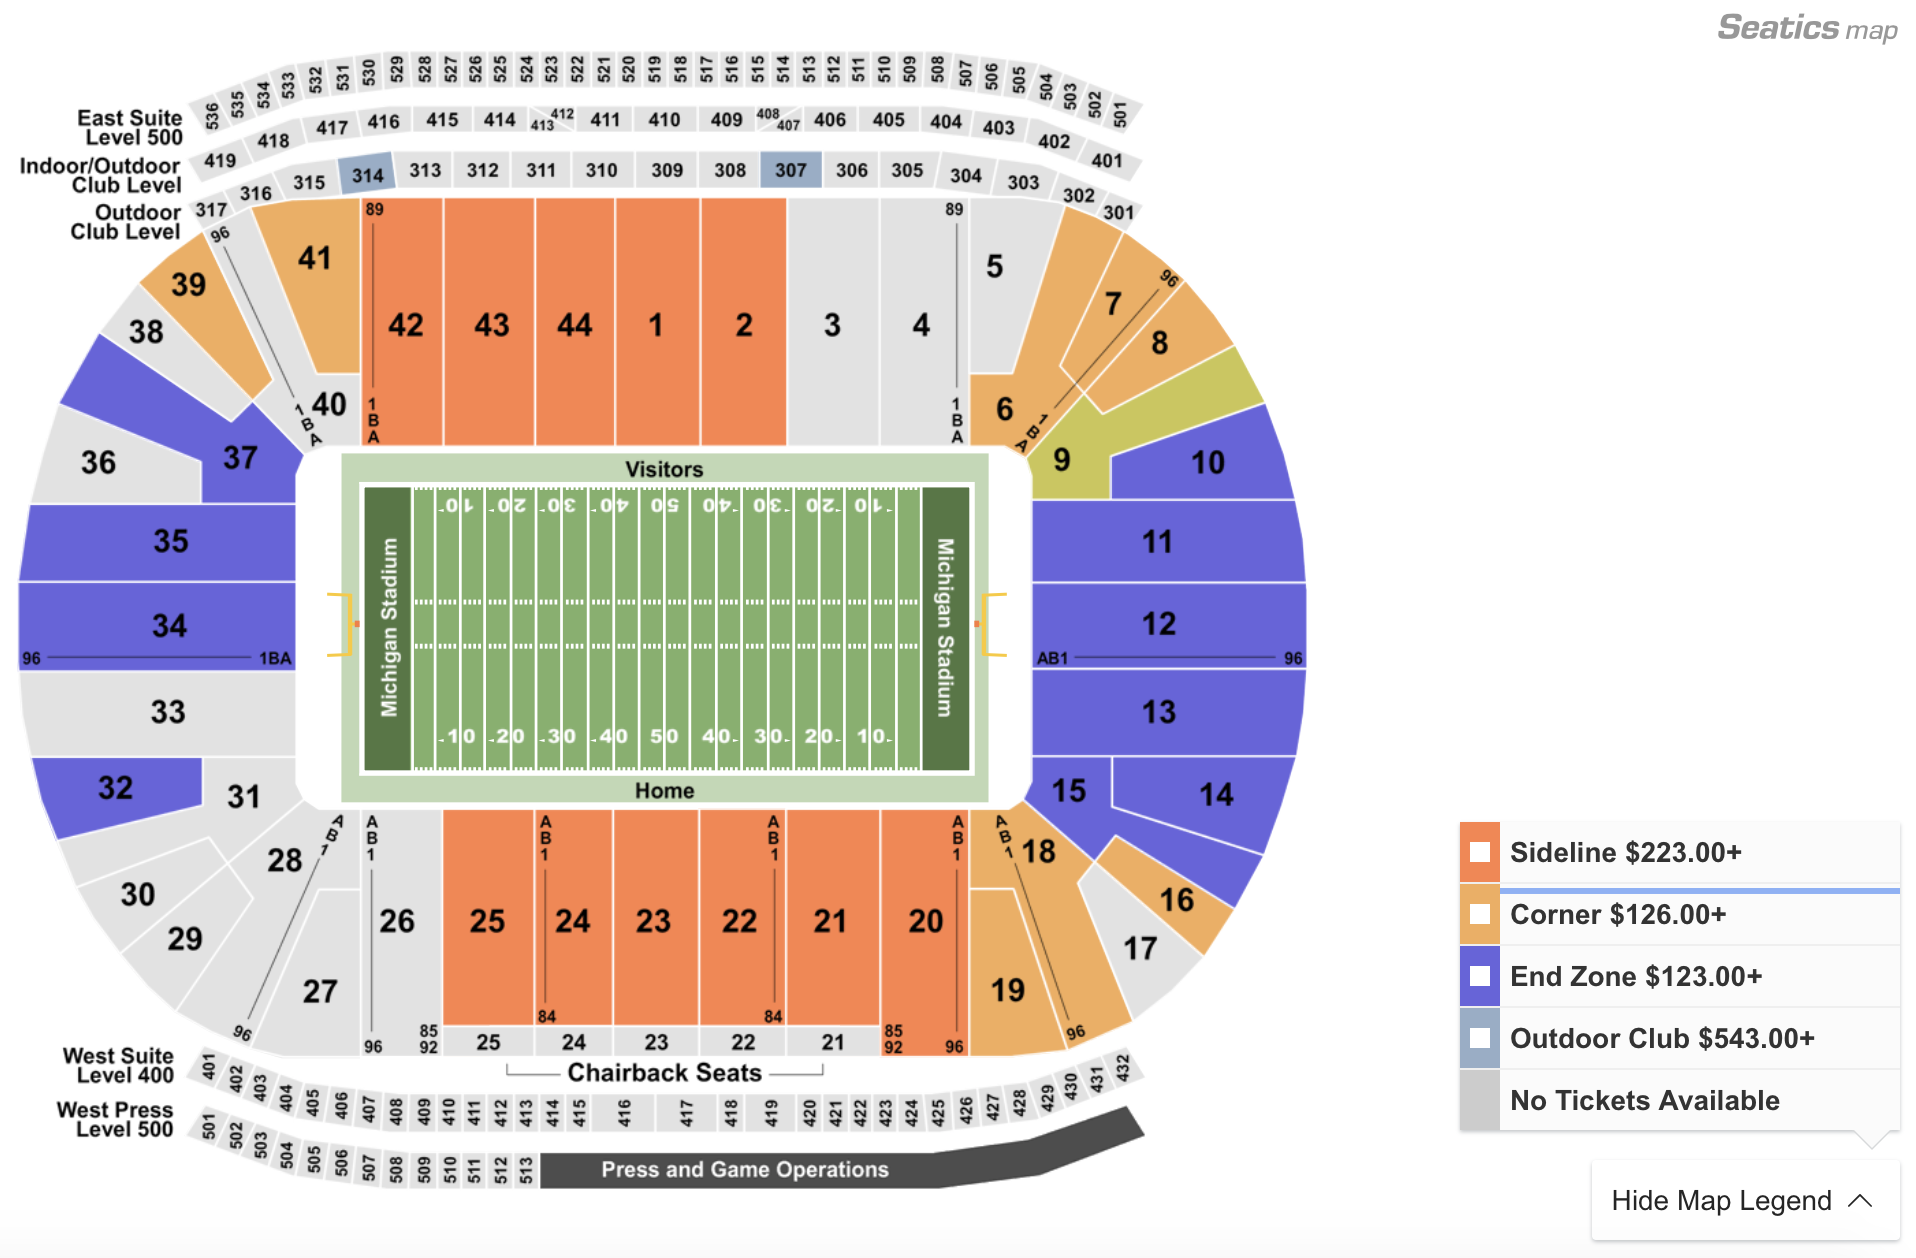 How To Find The Cheapest Michigan vs. Ohio State Football Tickets